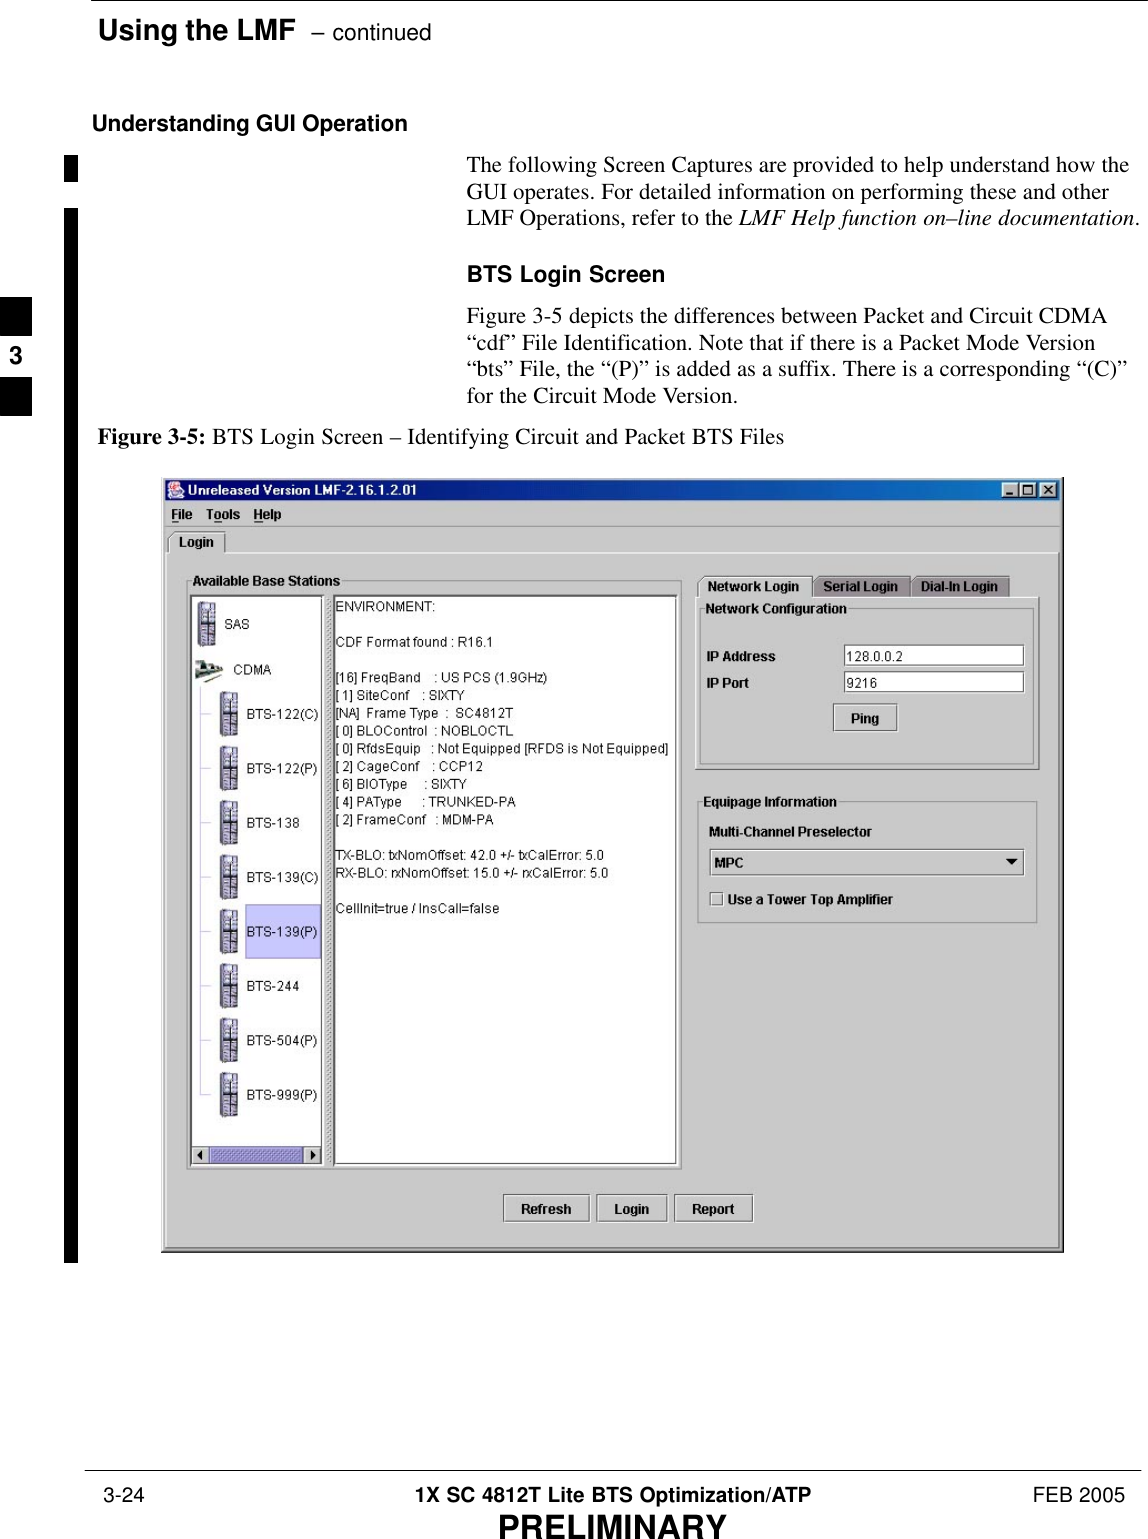 Using the LMF  – continued 3-24 1X SC 4812T Lite BTS Optimization/ATP FEB 2005PRELIMINARYUnderstanding GUI OperationThe following Screen Captures are provided to help understand how theGUI operates. For detailed information on performing these and otherLMF Operations, refer to the LMF Help function on–line documentation.BTS Login ScreenFigure 3-5 depicts the differences between Packet and Circuit CDMA“cdf” File Identification. Note that if there is a Packet Mode Version“bts” File, the “(P)” is added as a suffix. There is a corresponding “(C)”for the Circuit Mode Version.Figure 3-5: BTS Login Screen – Identifying Circuit and Packet BTS Files3